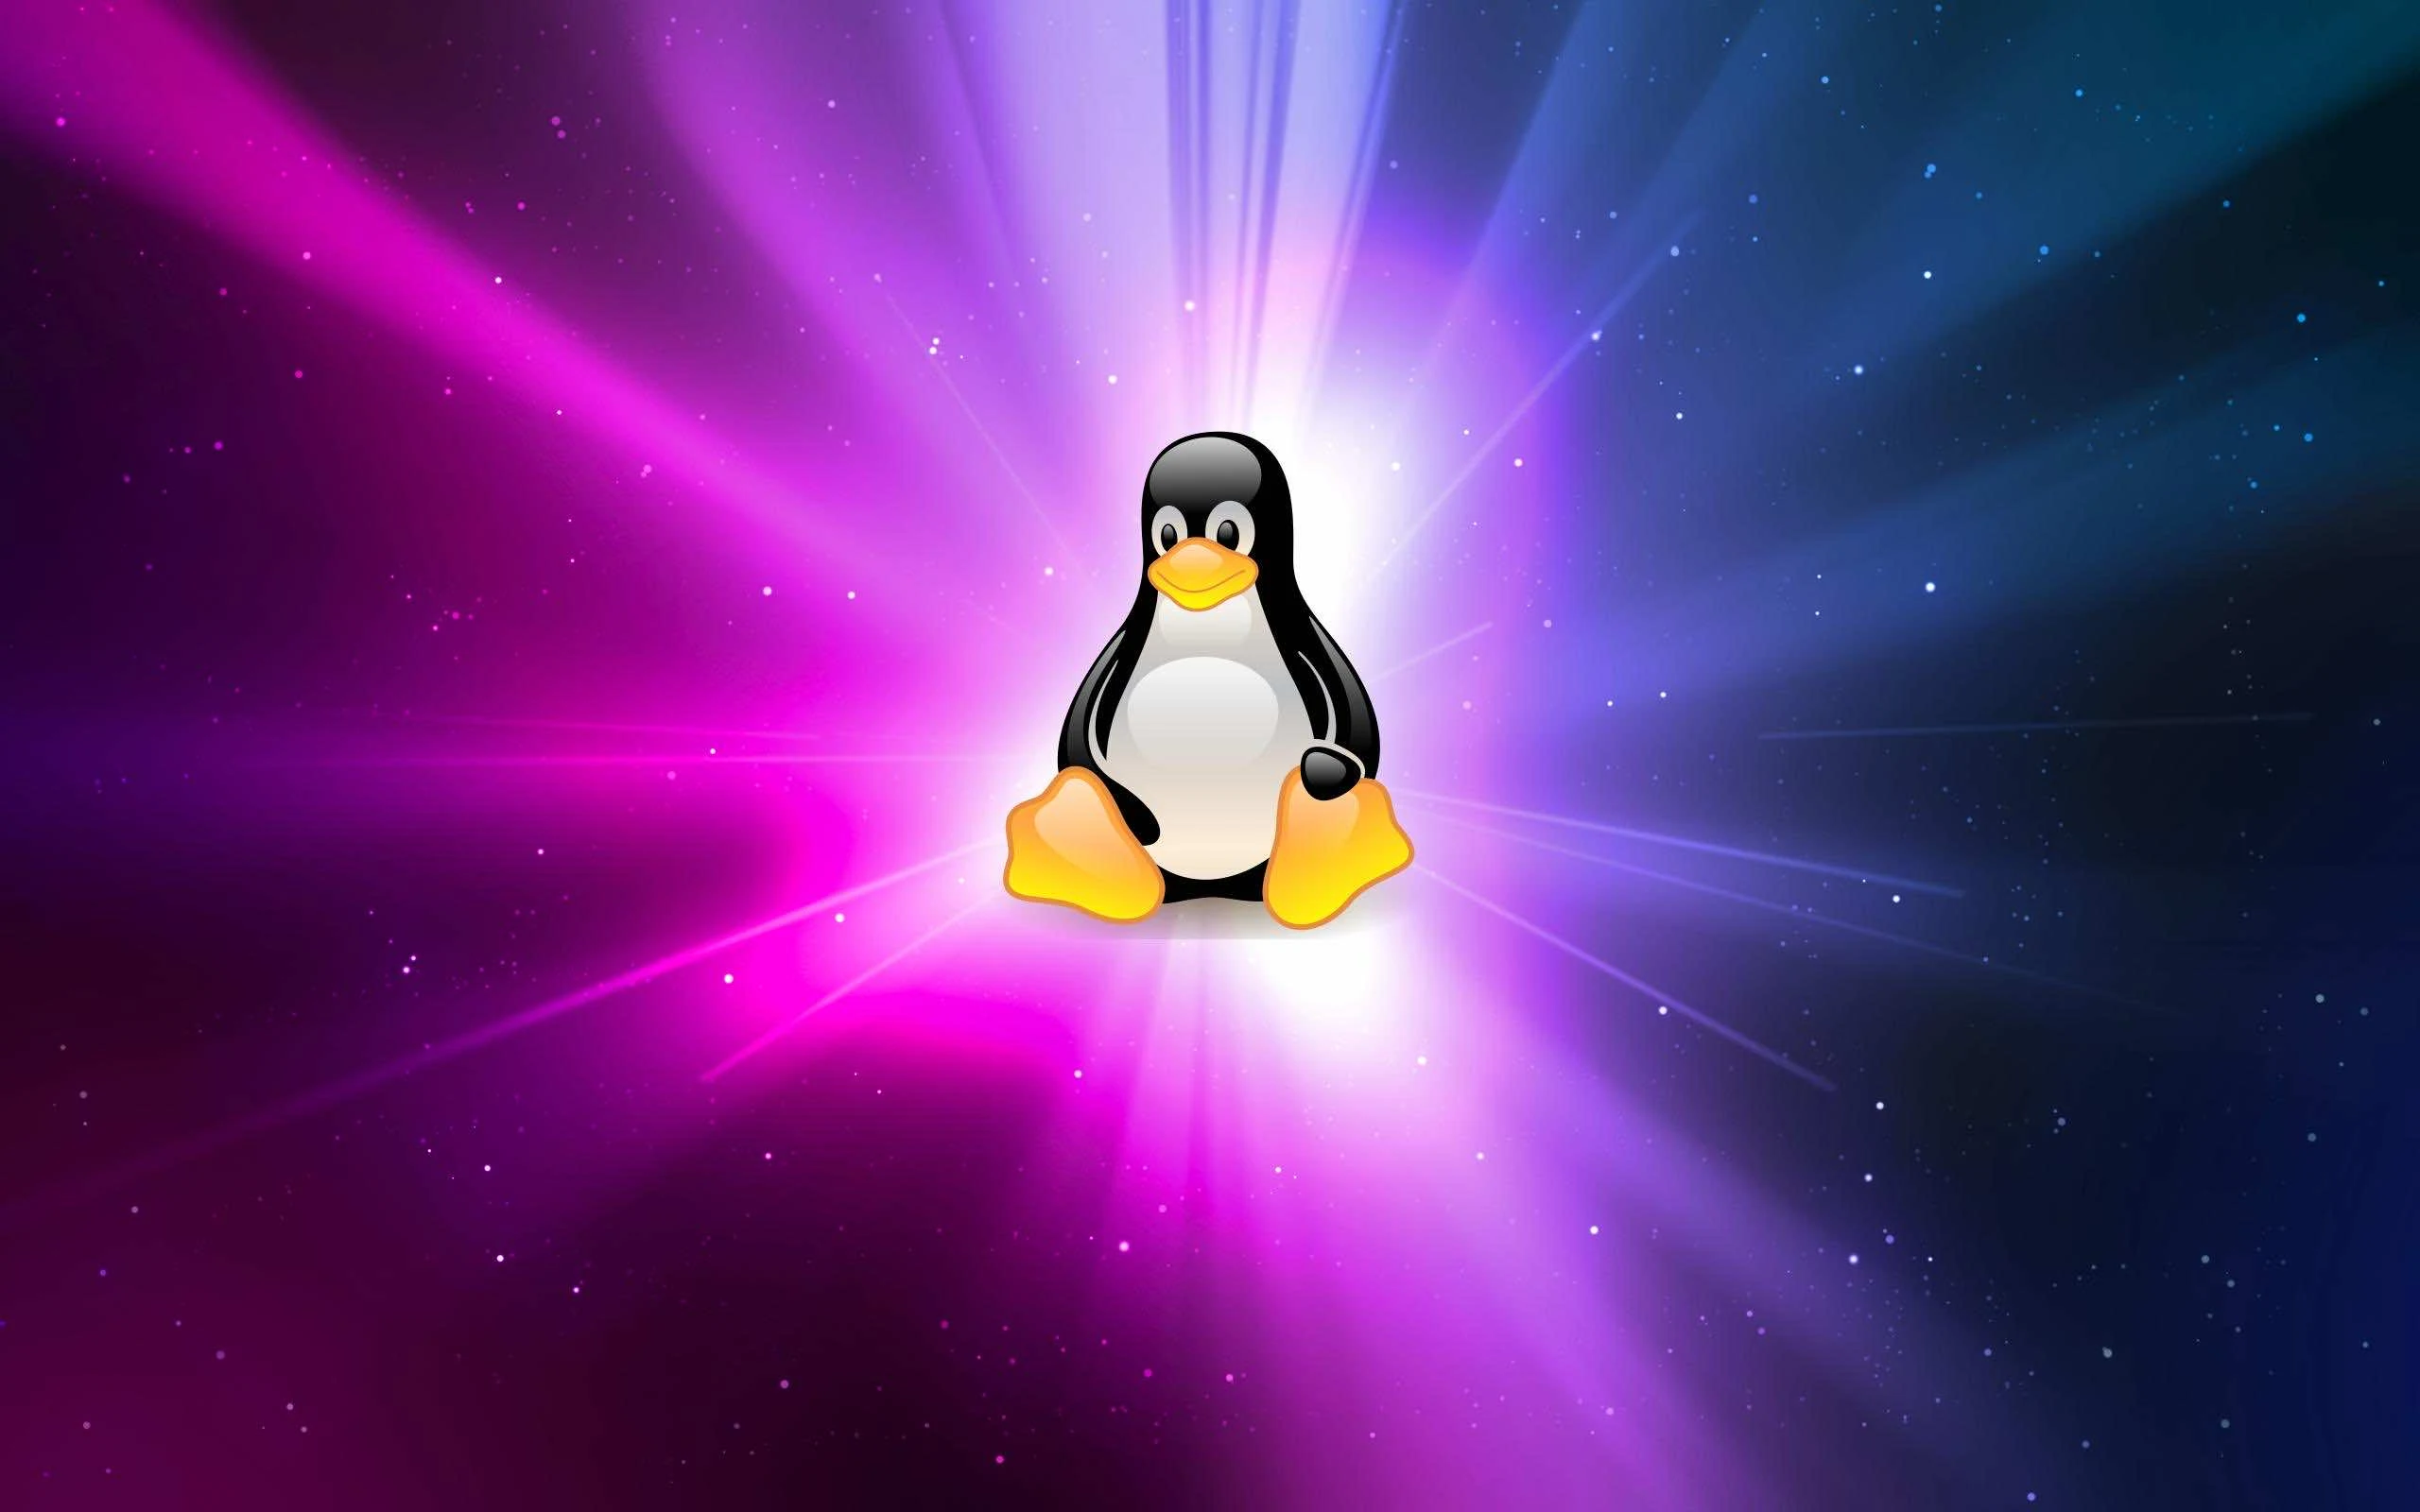 Shutting down Linux with plink from Windows Tux the Linux mascot